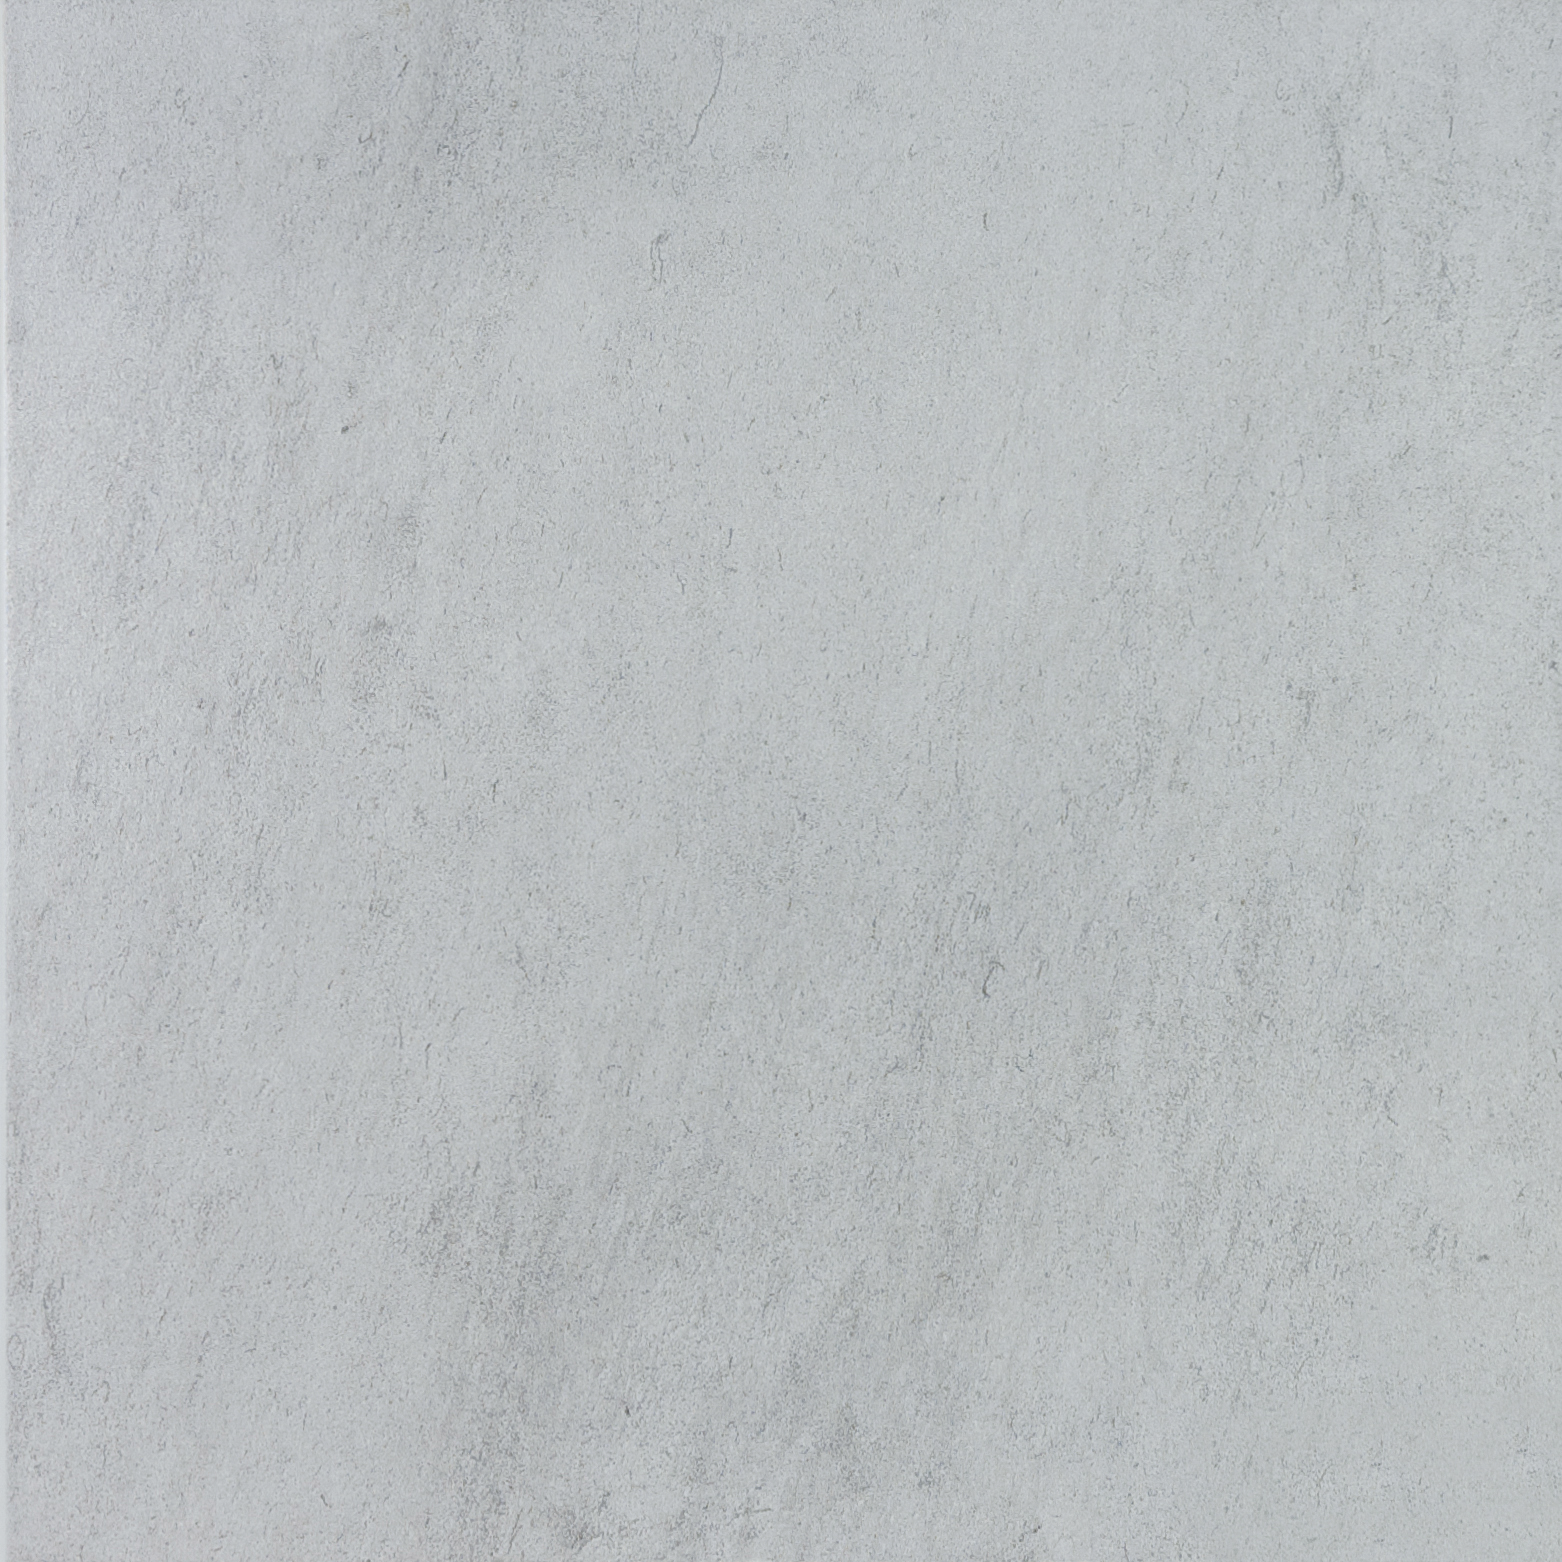 grey pattern glazed porcelain field tile from cinq anatolia collection distributed by surface group international matte finish pressed edge 13x13 square shape